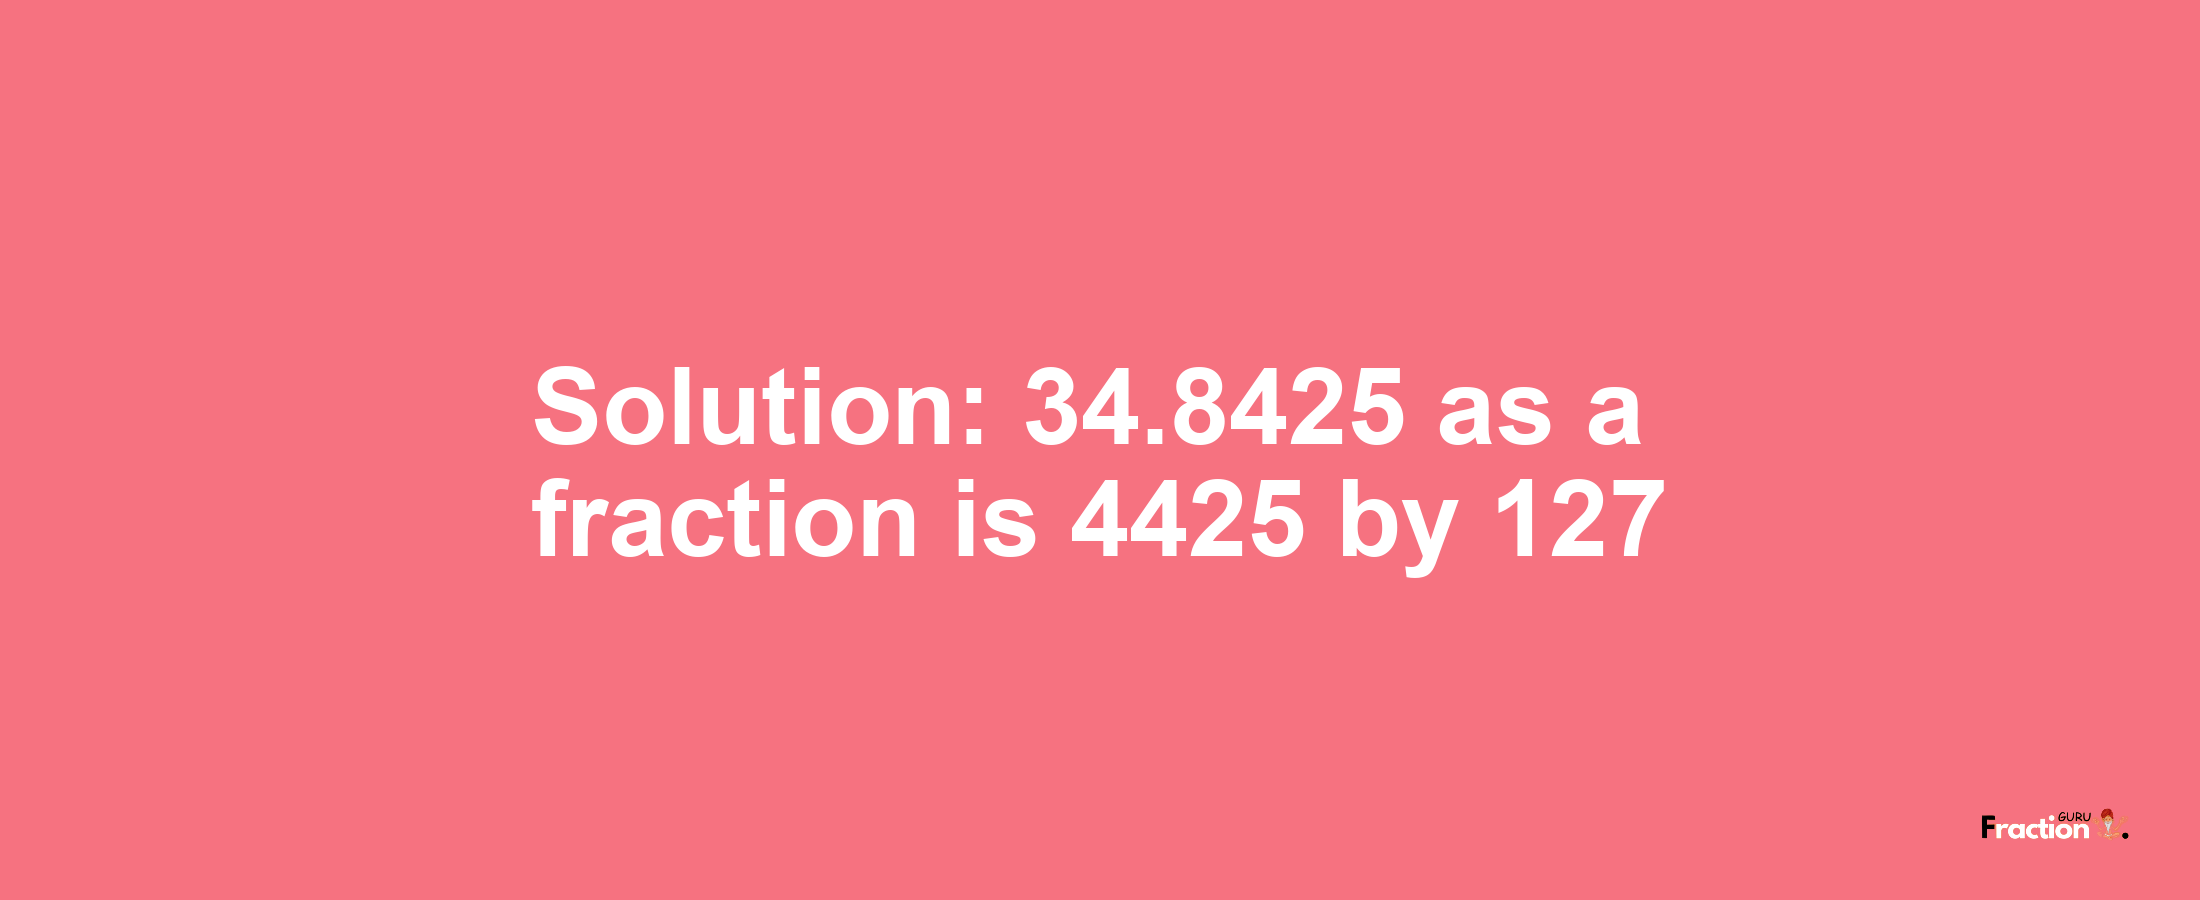 Solution:34.8425 as a fraction is 4425/127